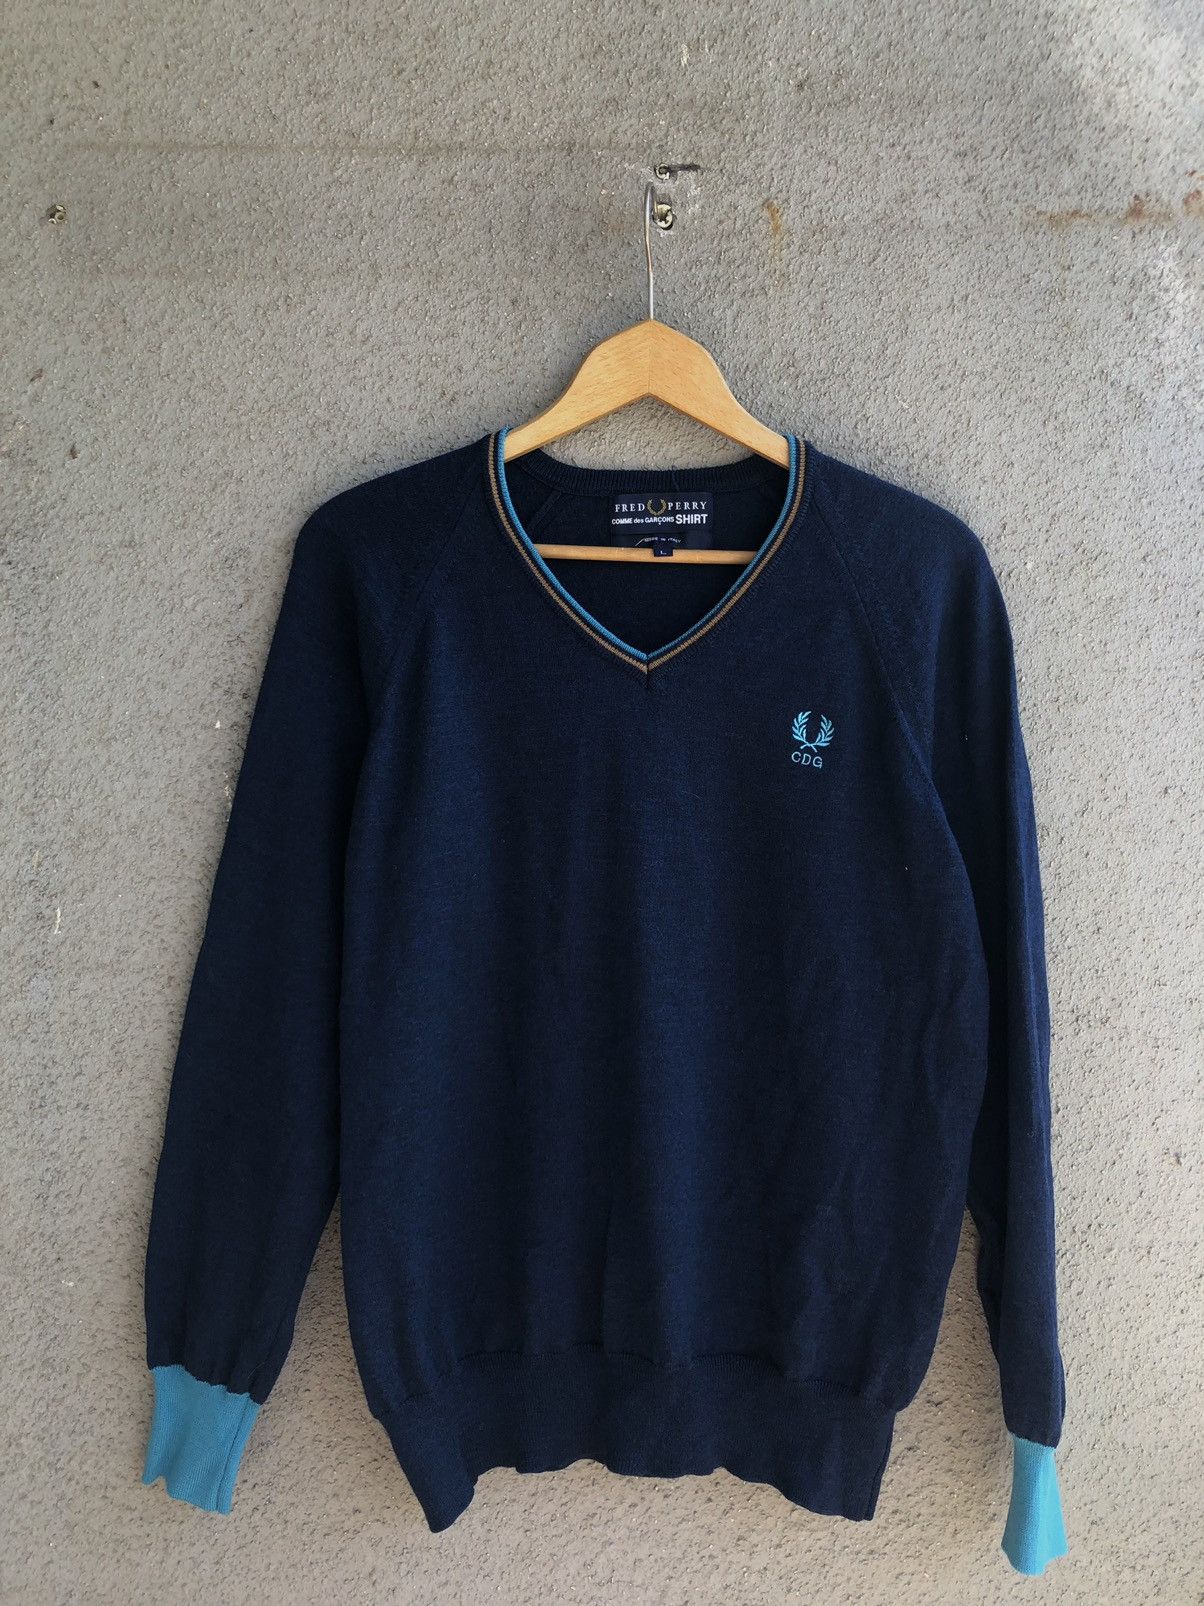 Fred Perry Comme Des Garçons x Fred Perry V-neck Sweater | Grailed